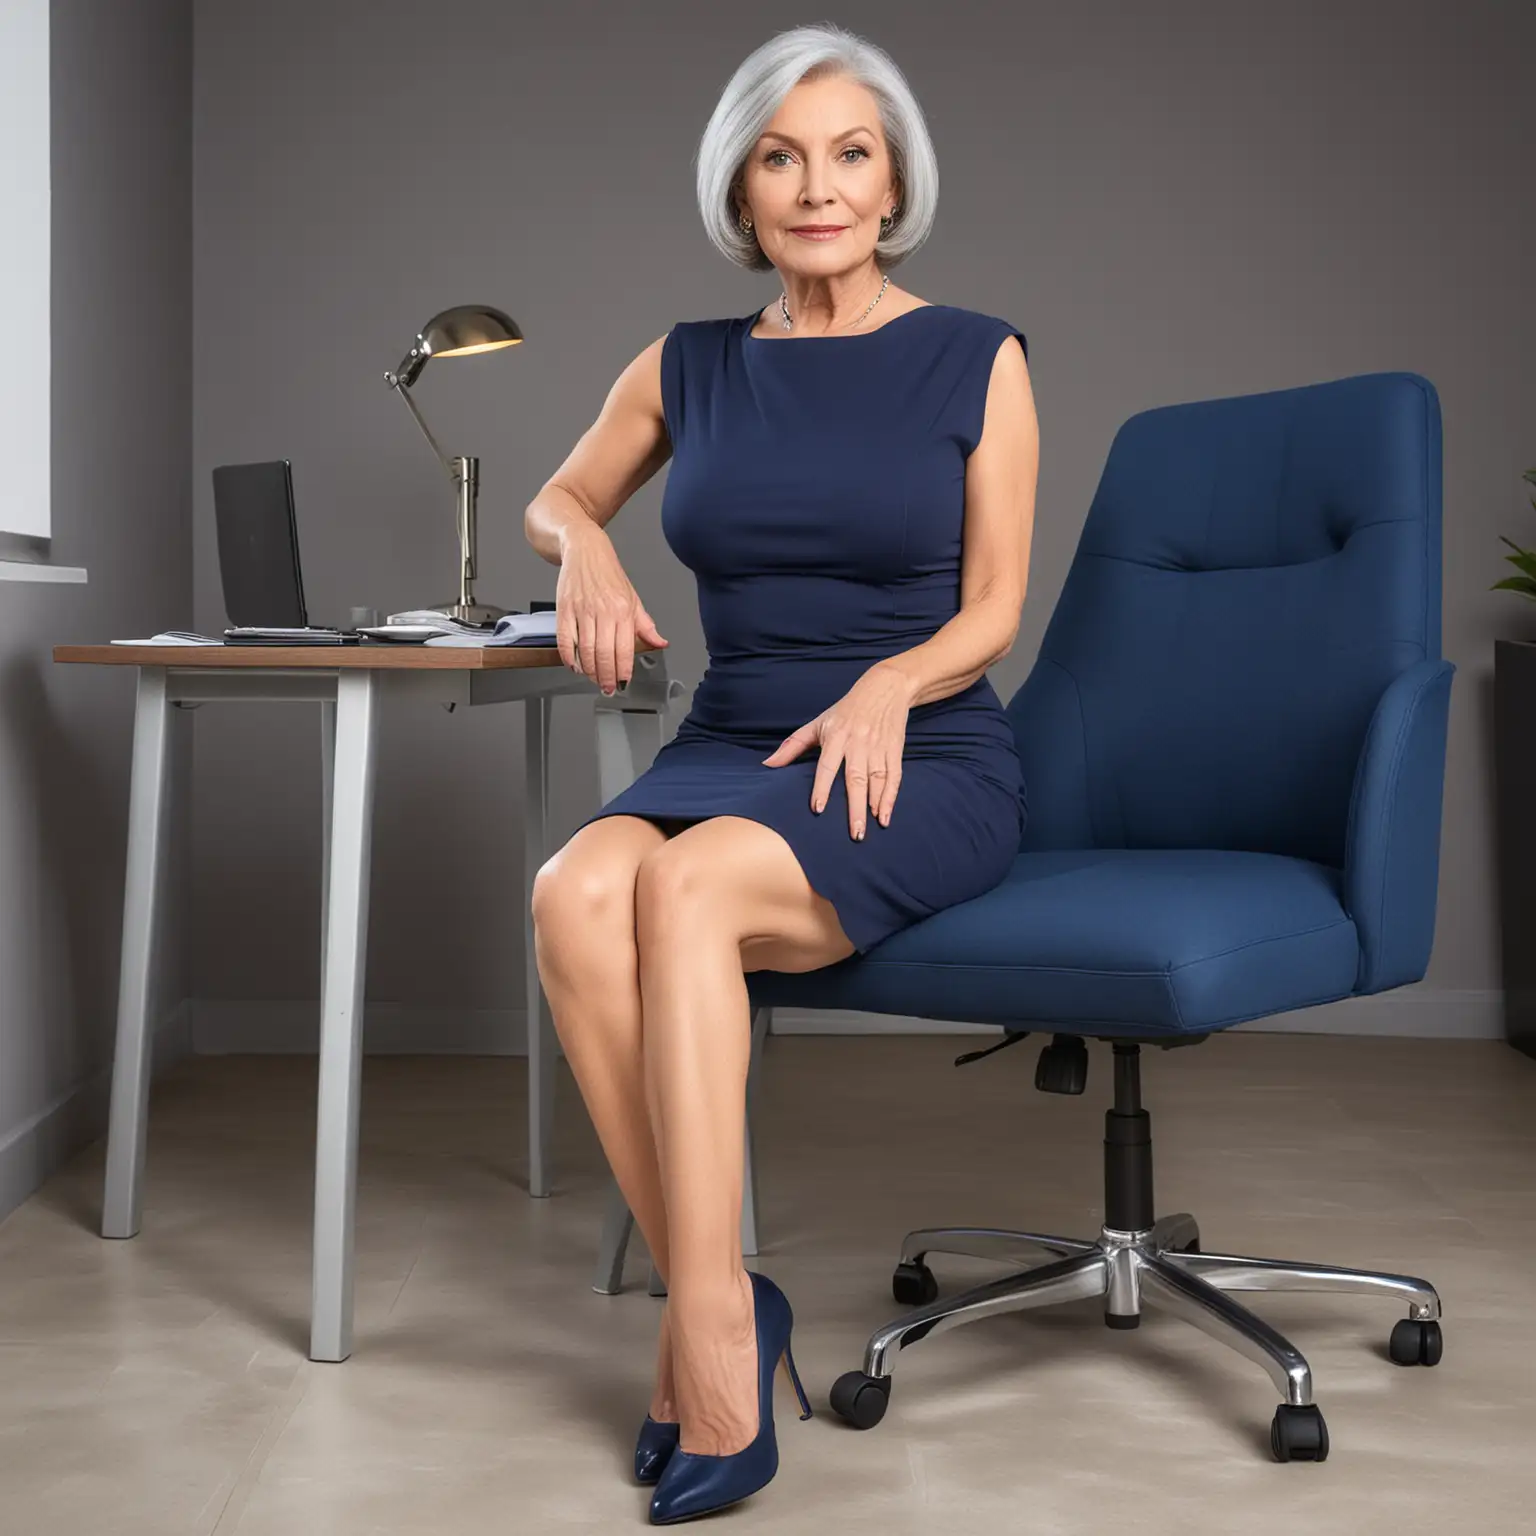 a slim beautiful 70-year-old woman with big breasts and grey hair in a bob wearing a tight blue navy dress and high heels sitting in an office chair